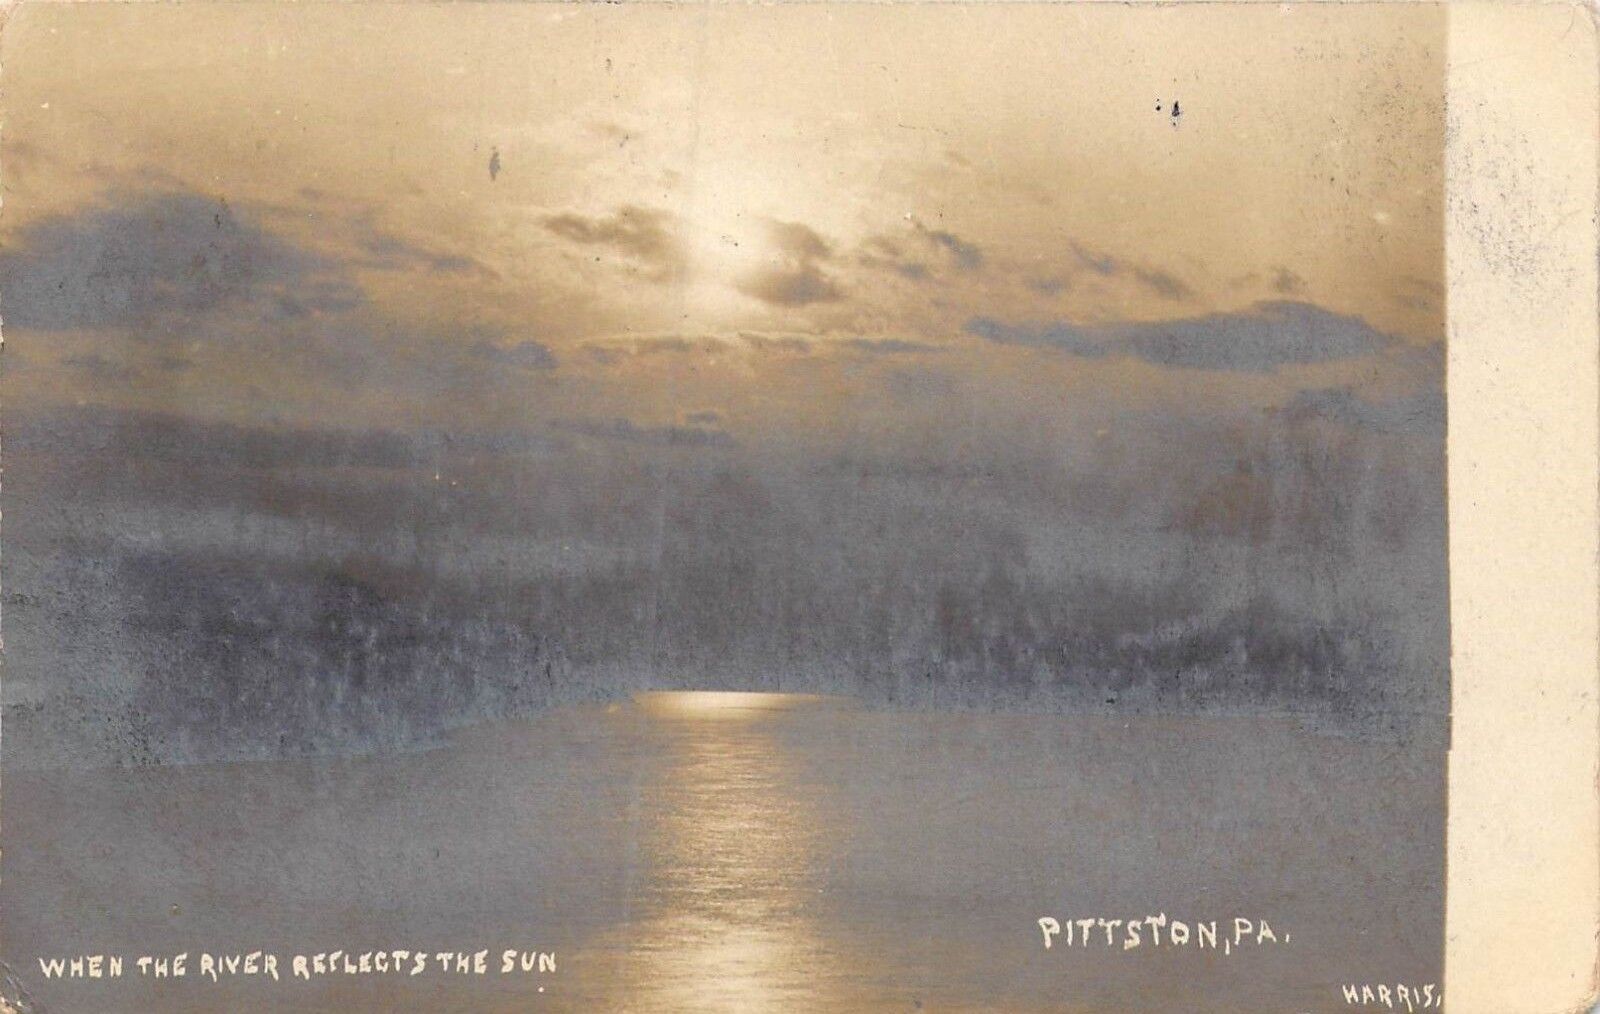 When the River Reflects The Sun, Pittston, Pa., 1905, Harris Photo